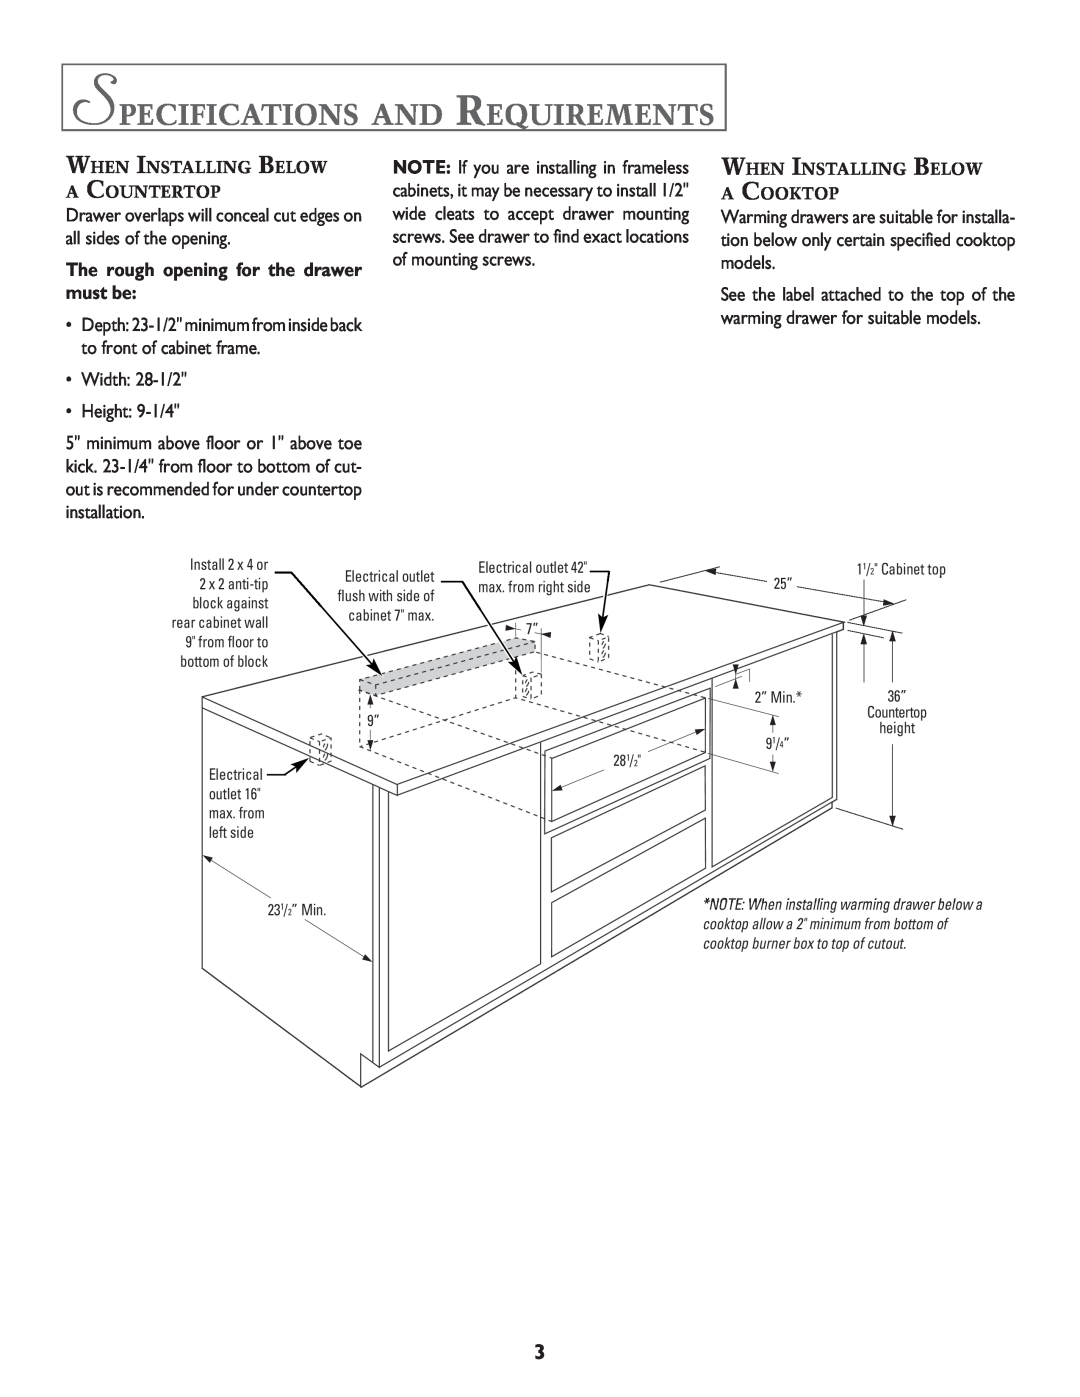 Jenn-Air 8101P549-60 specifications Specifications And Requirements, The rough opening for the drawer must be 